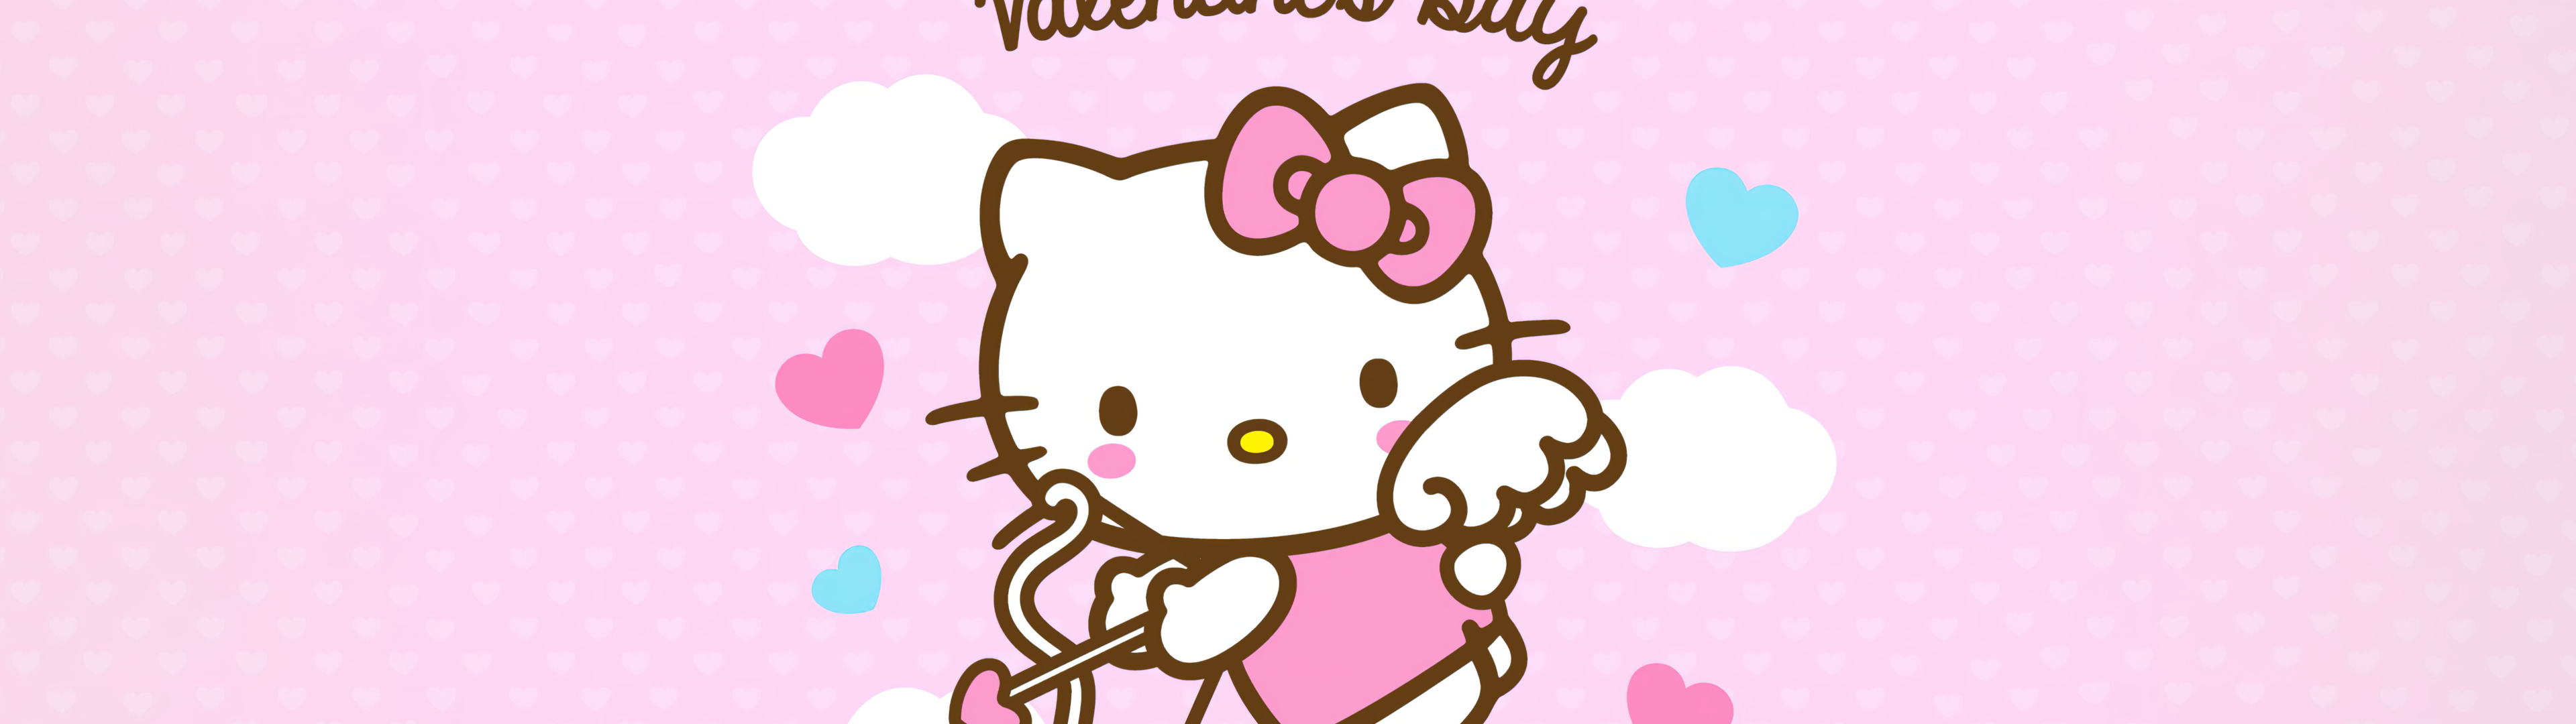 Valentines day hello kittty wallpapers